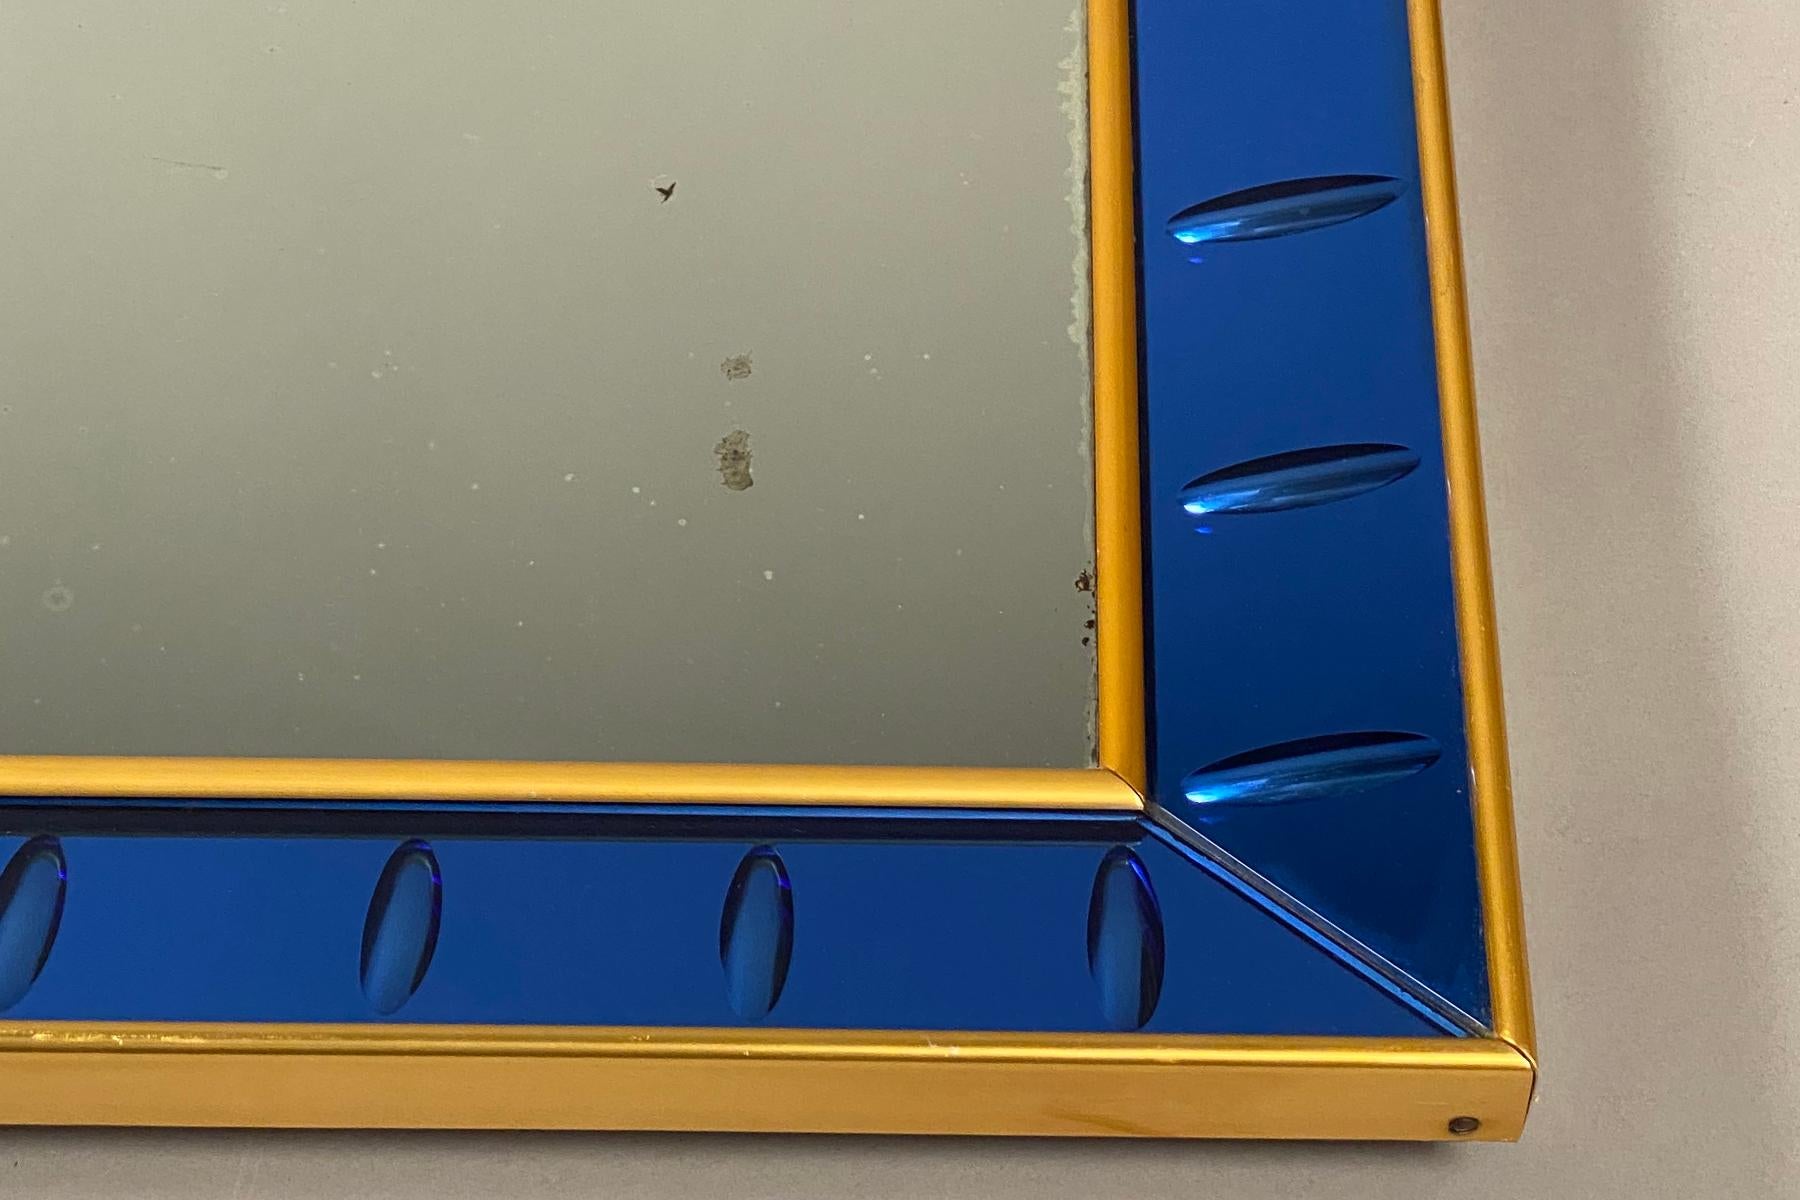 Rectangular mirror plate, framed with panels of similarly mirrored, blue colored glass with beveled edges, held in brass trim. Age spots in mirror plate consistent with the piece’s age.